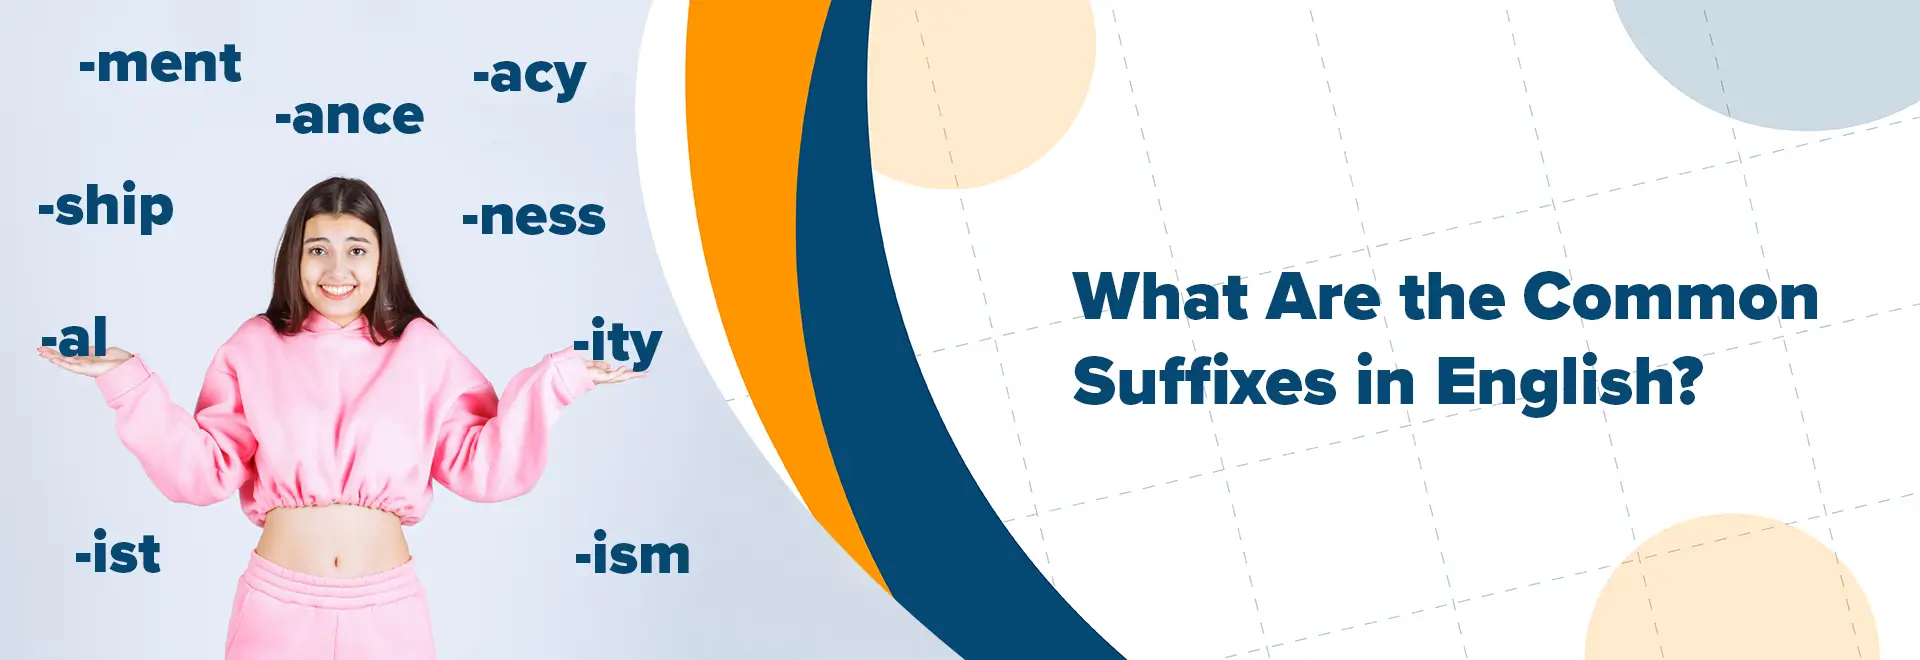 What Are the Common Suffixes in English _ header